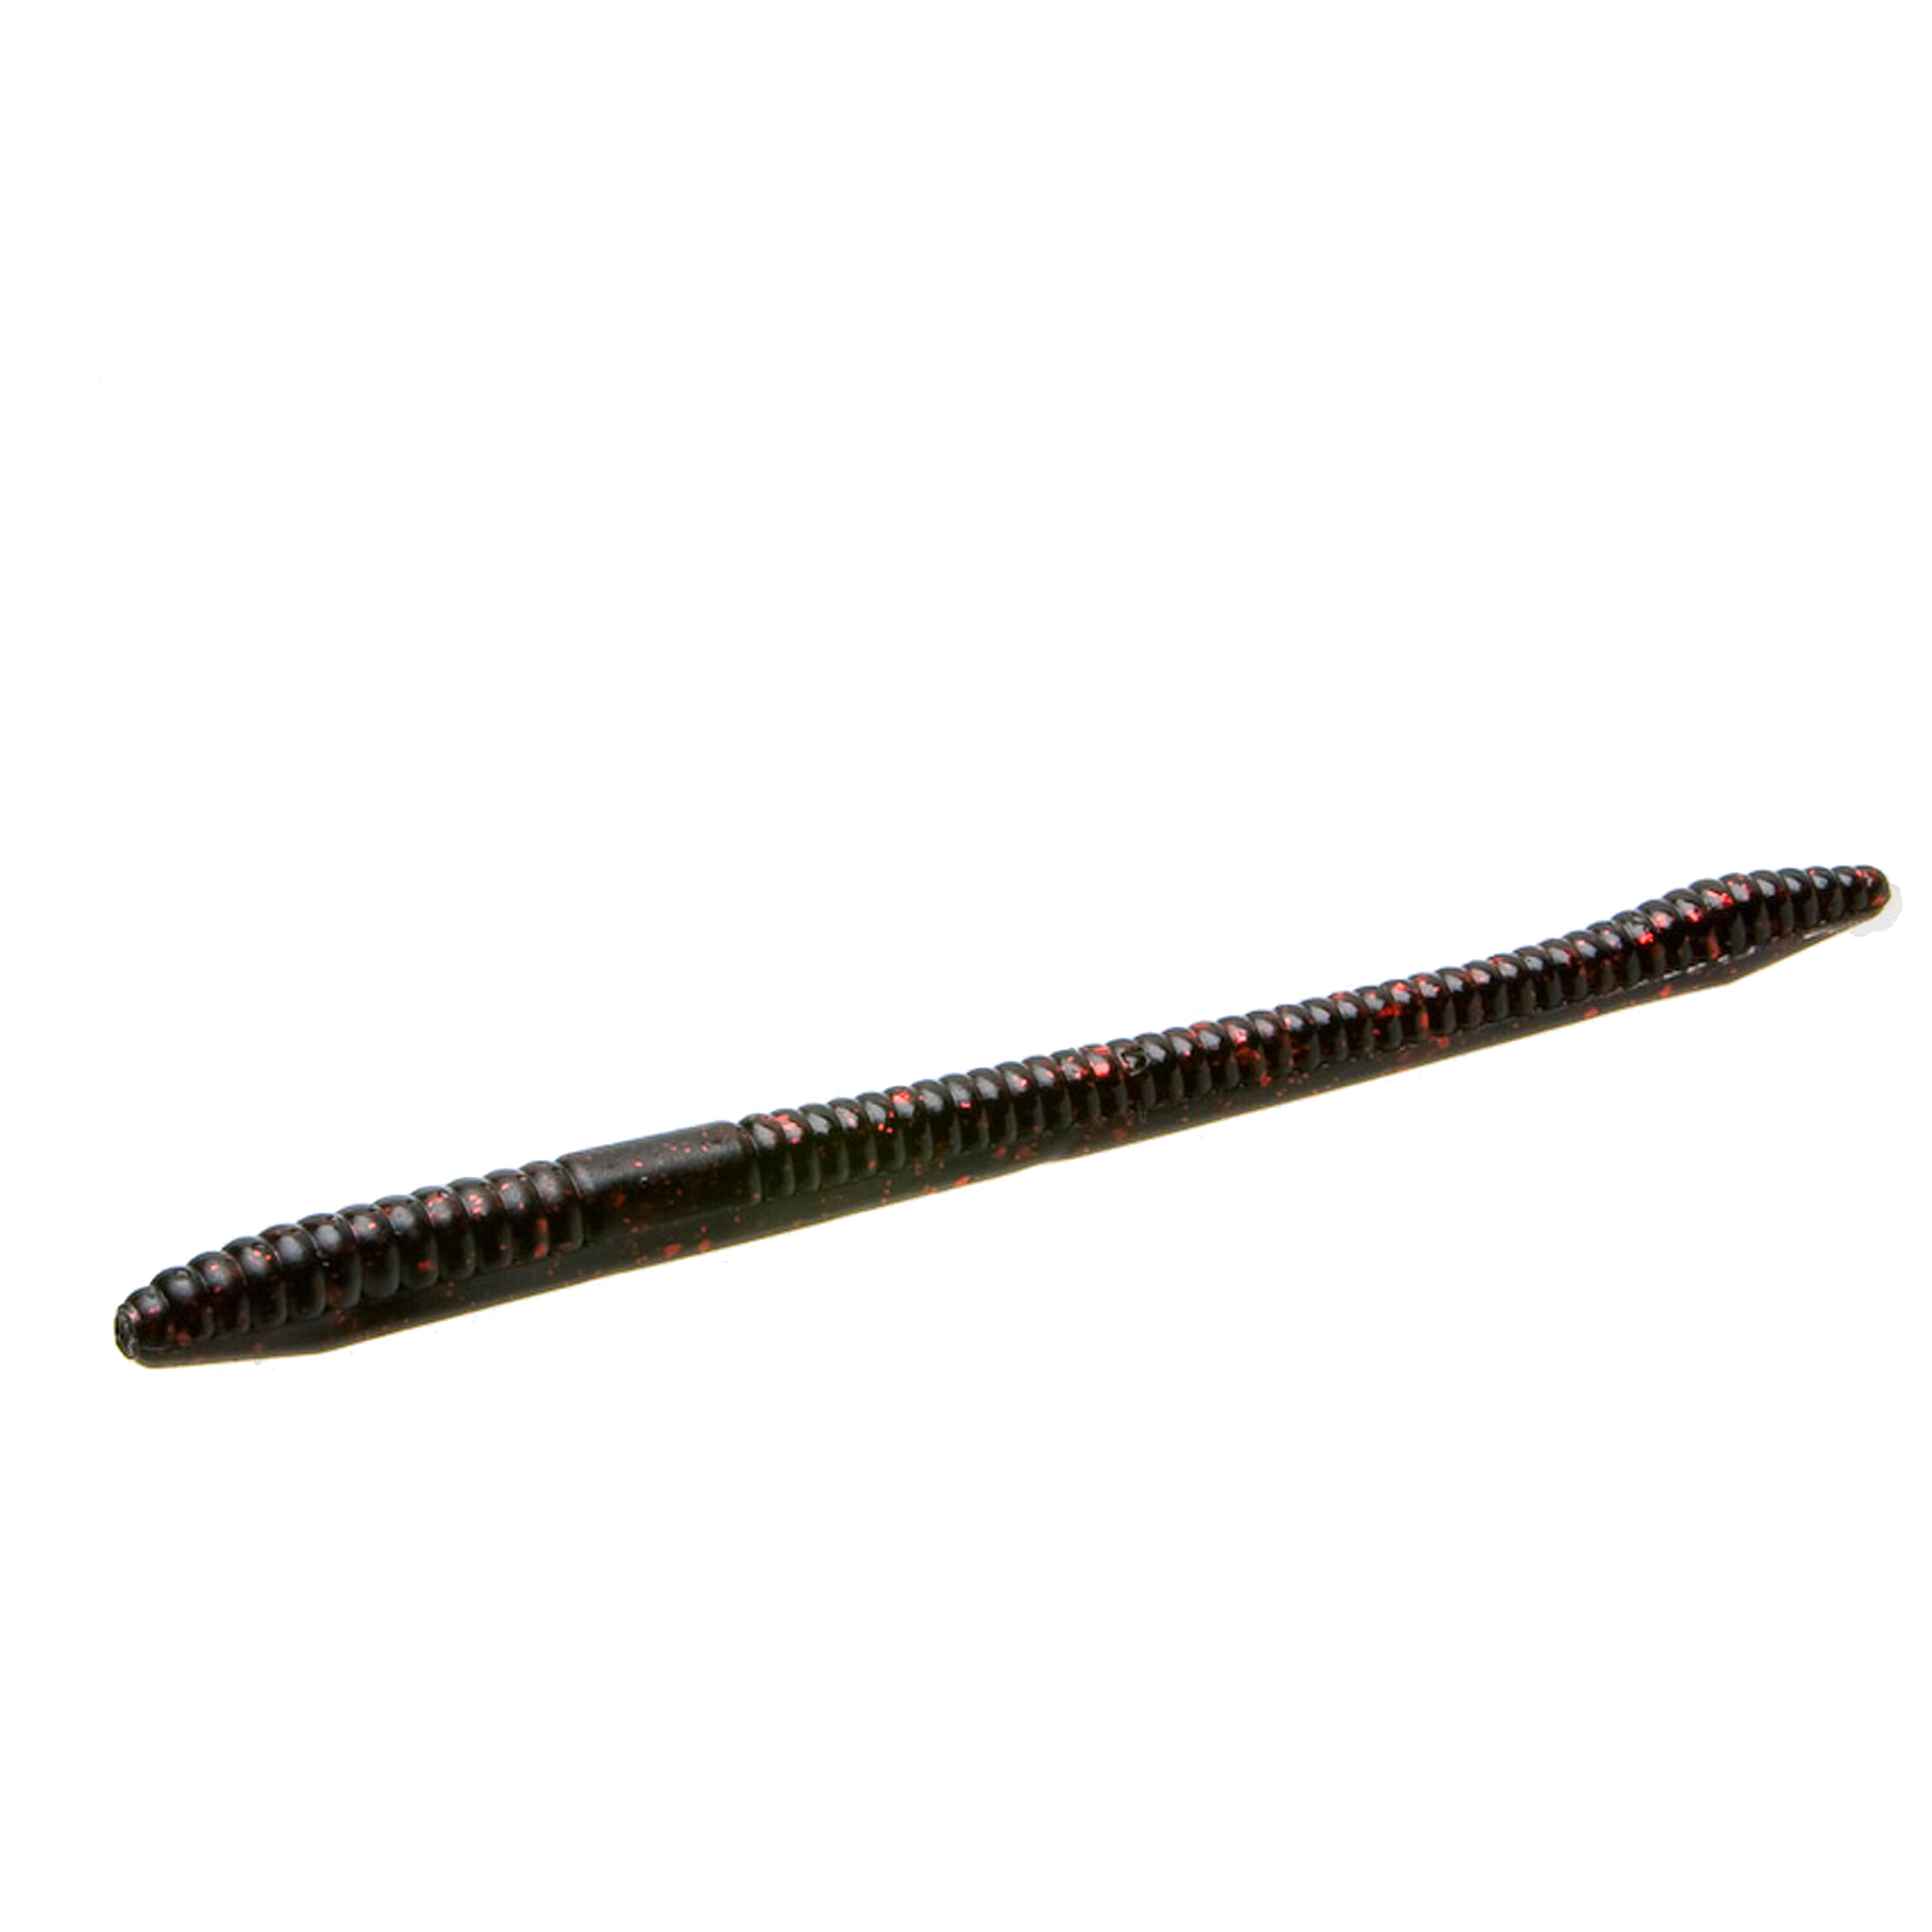 ZOOM FINESSE WORM BLACK & RED BASS FISHING SOFT LURE